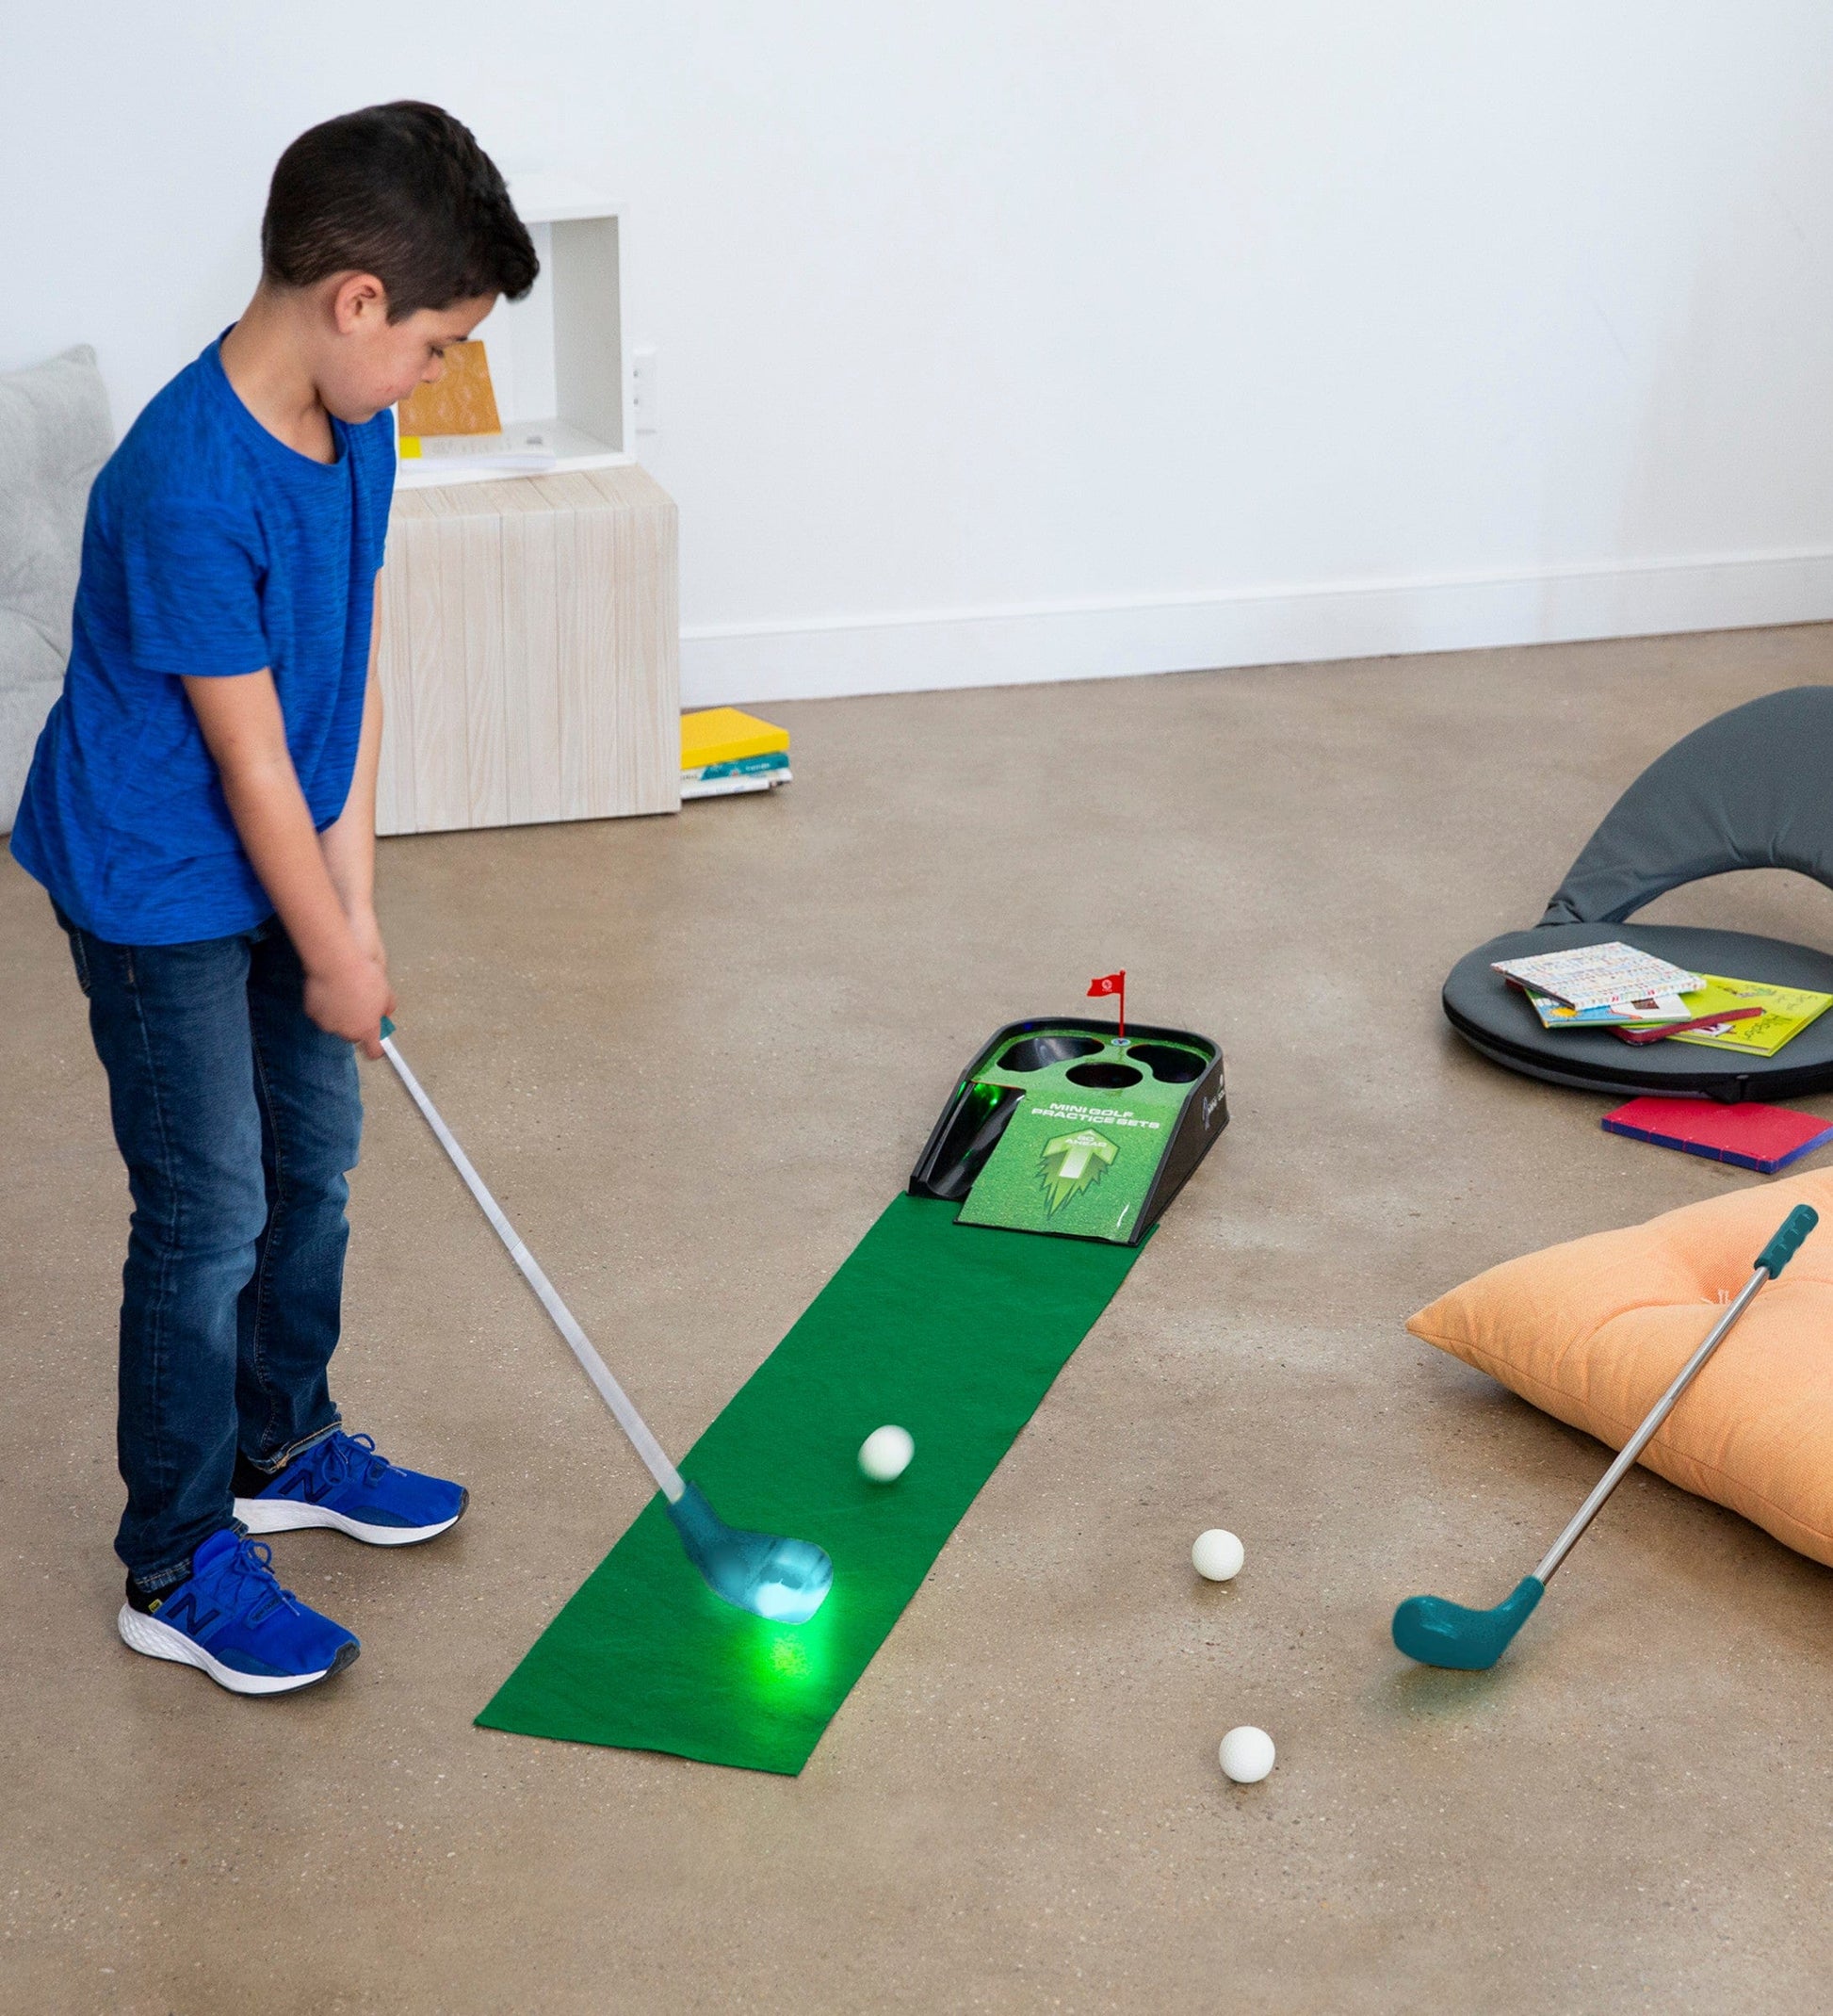 Mini indoor Golf Player Pack, Mini Golf Game for Kids and Adults, Includes  Es